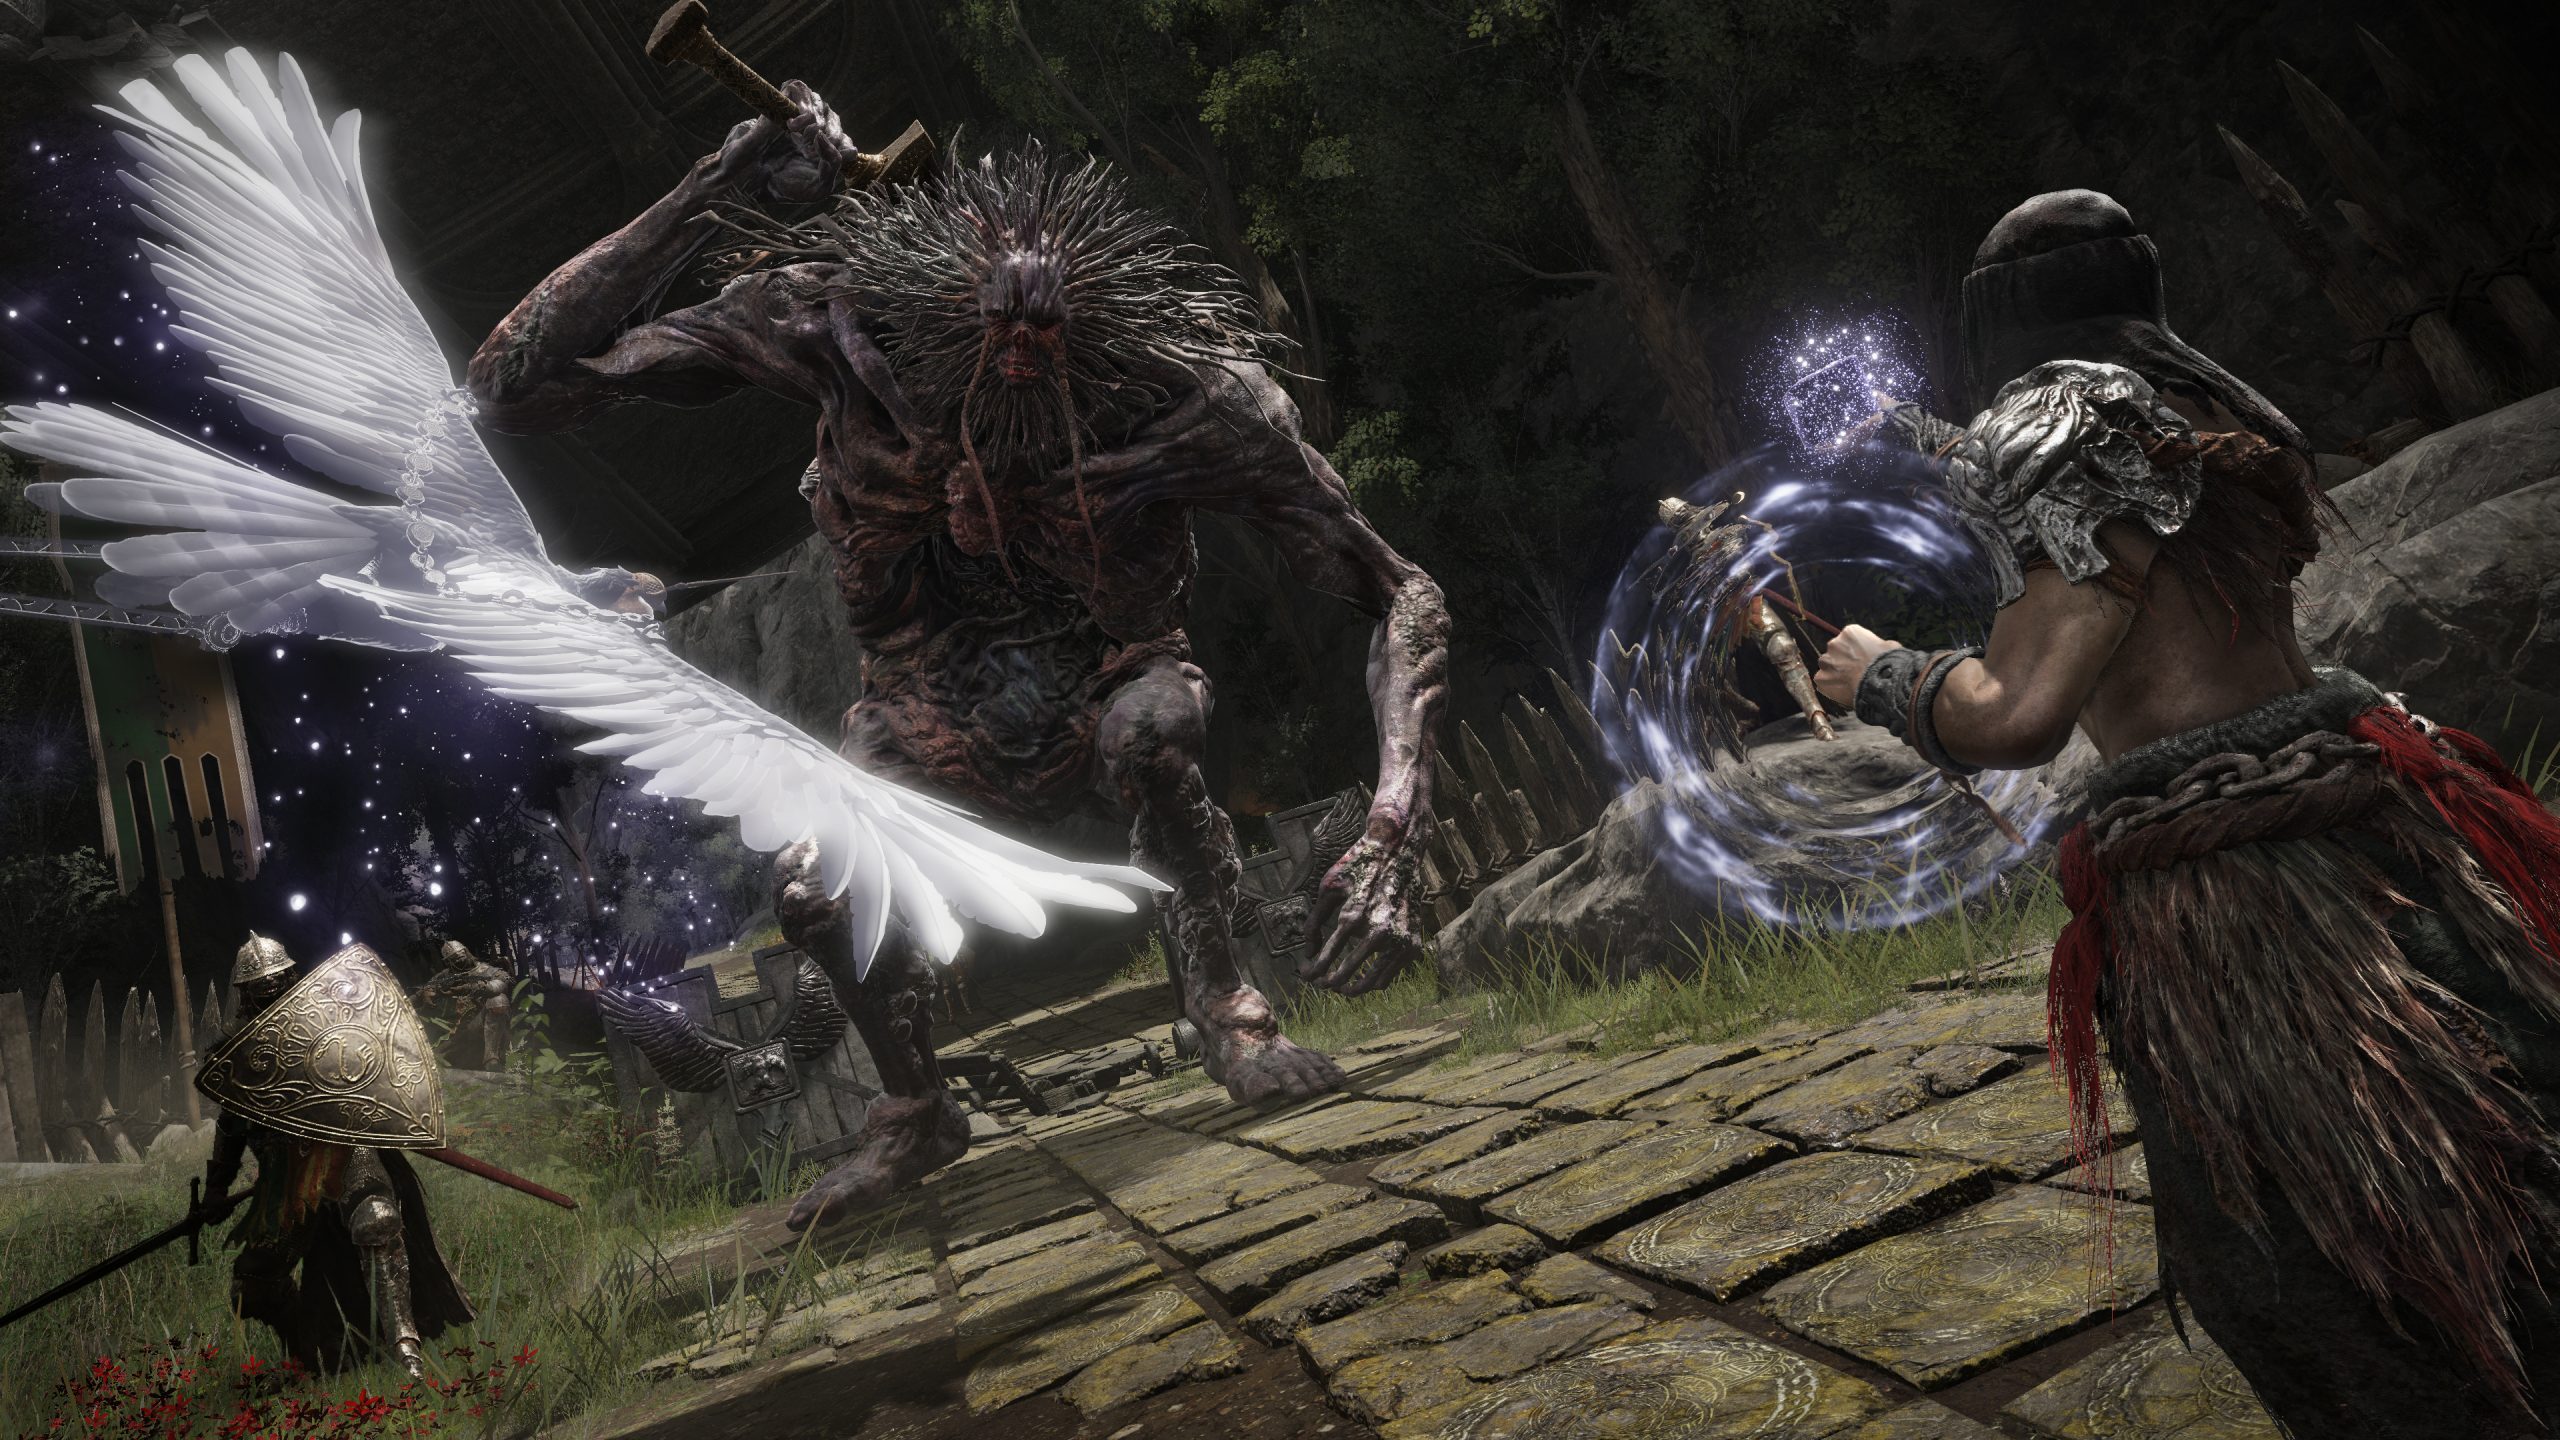 A still from the Elden Ring game showing a figure casting a spell at a large creature in combat